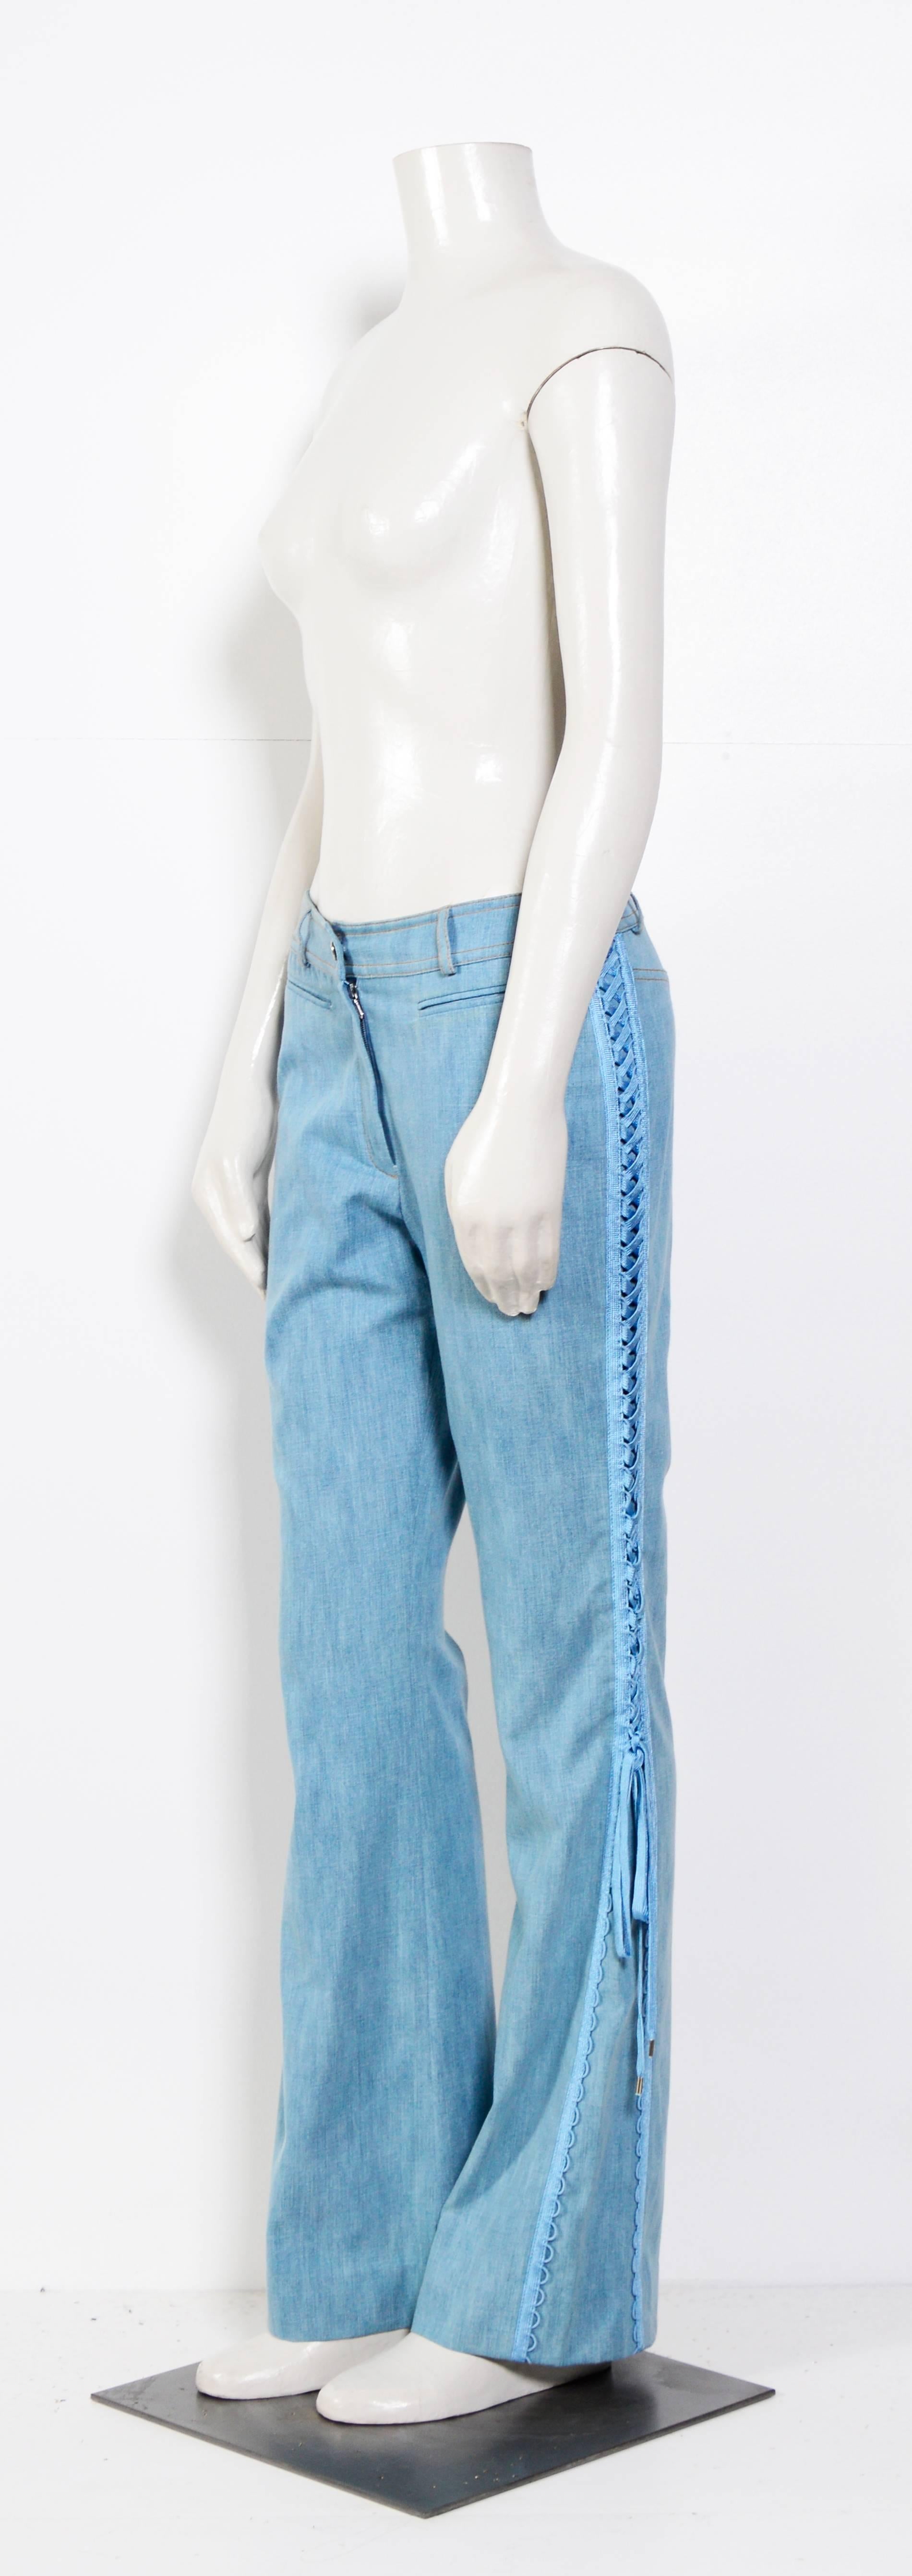 90's Christian Dior Boutique By John Galliano sexy soft jeans.
F 38 - GB 10 - USA 6
Waist 15